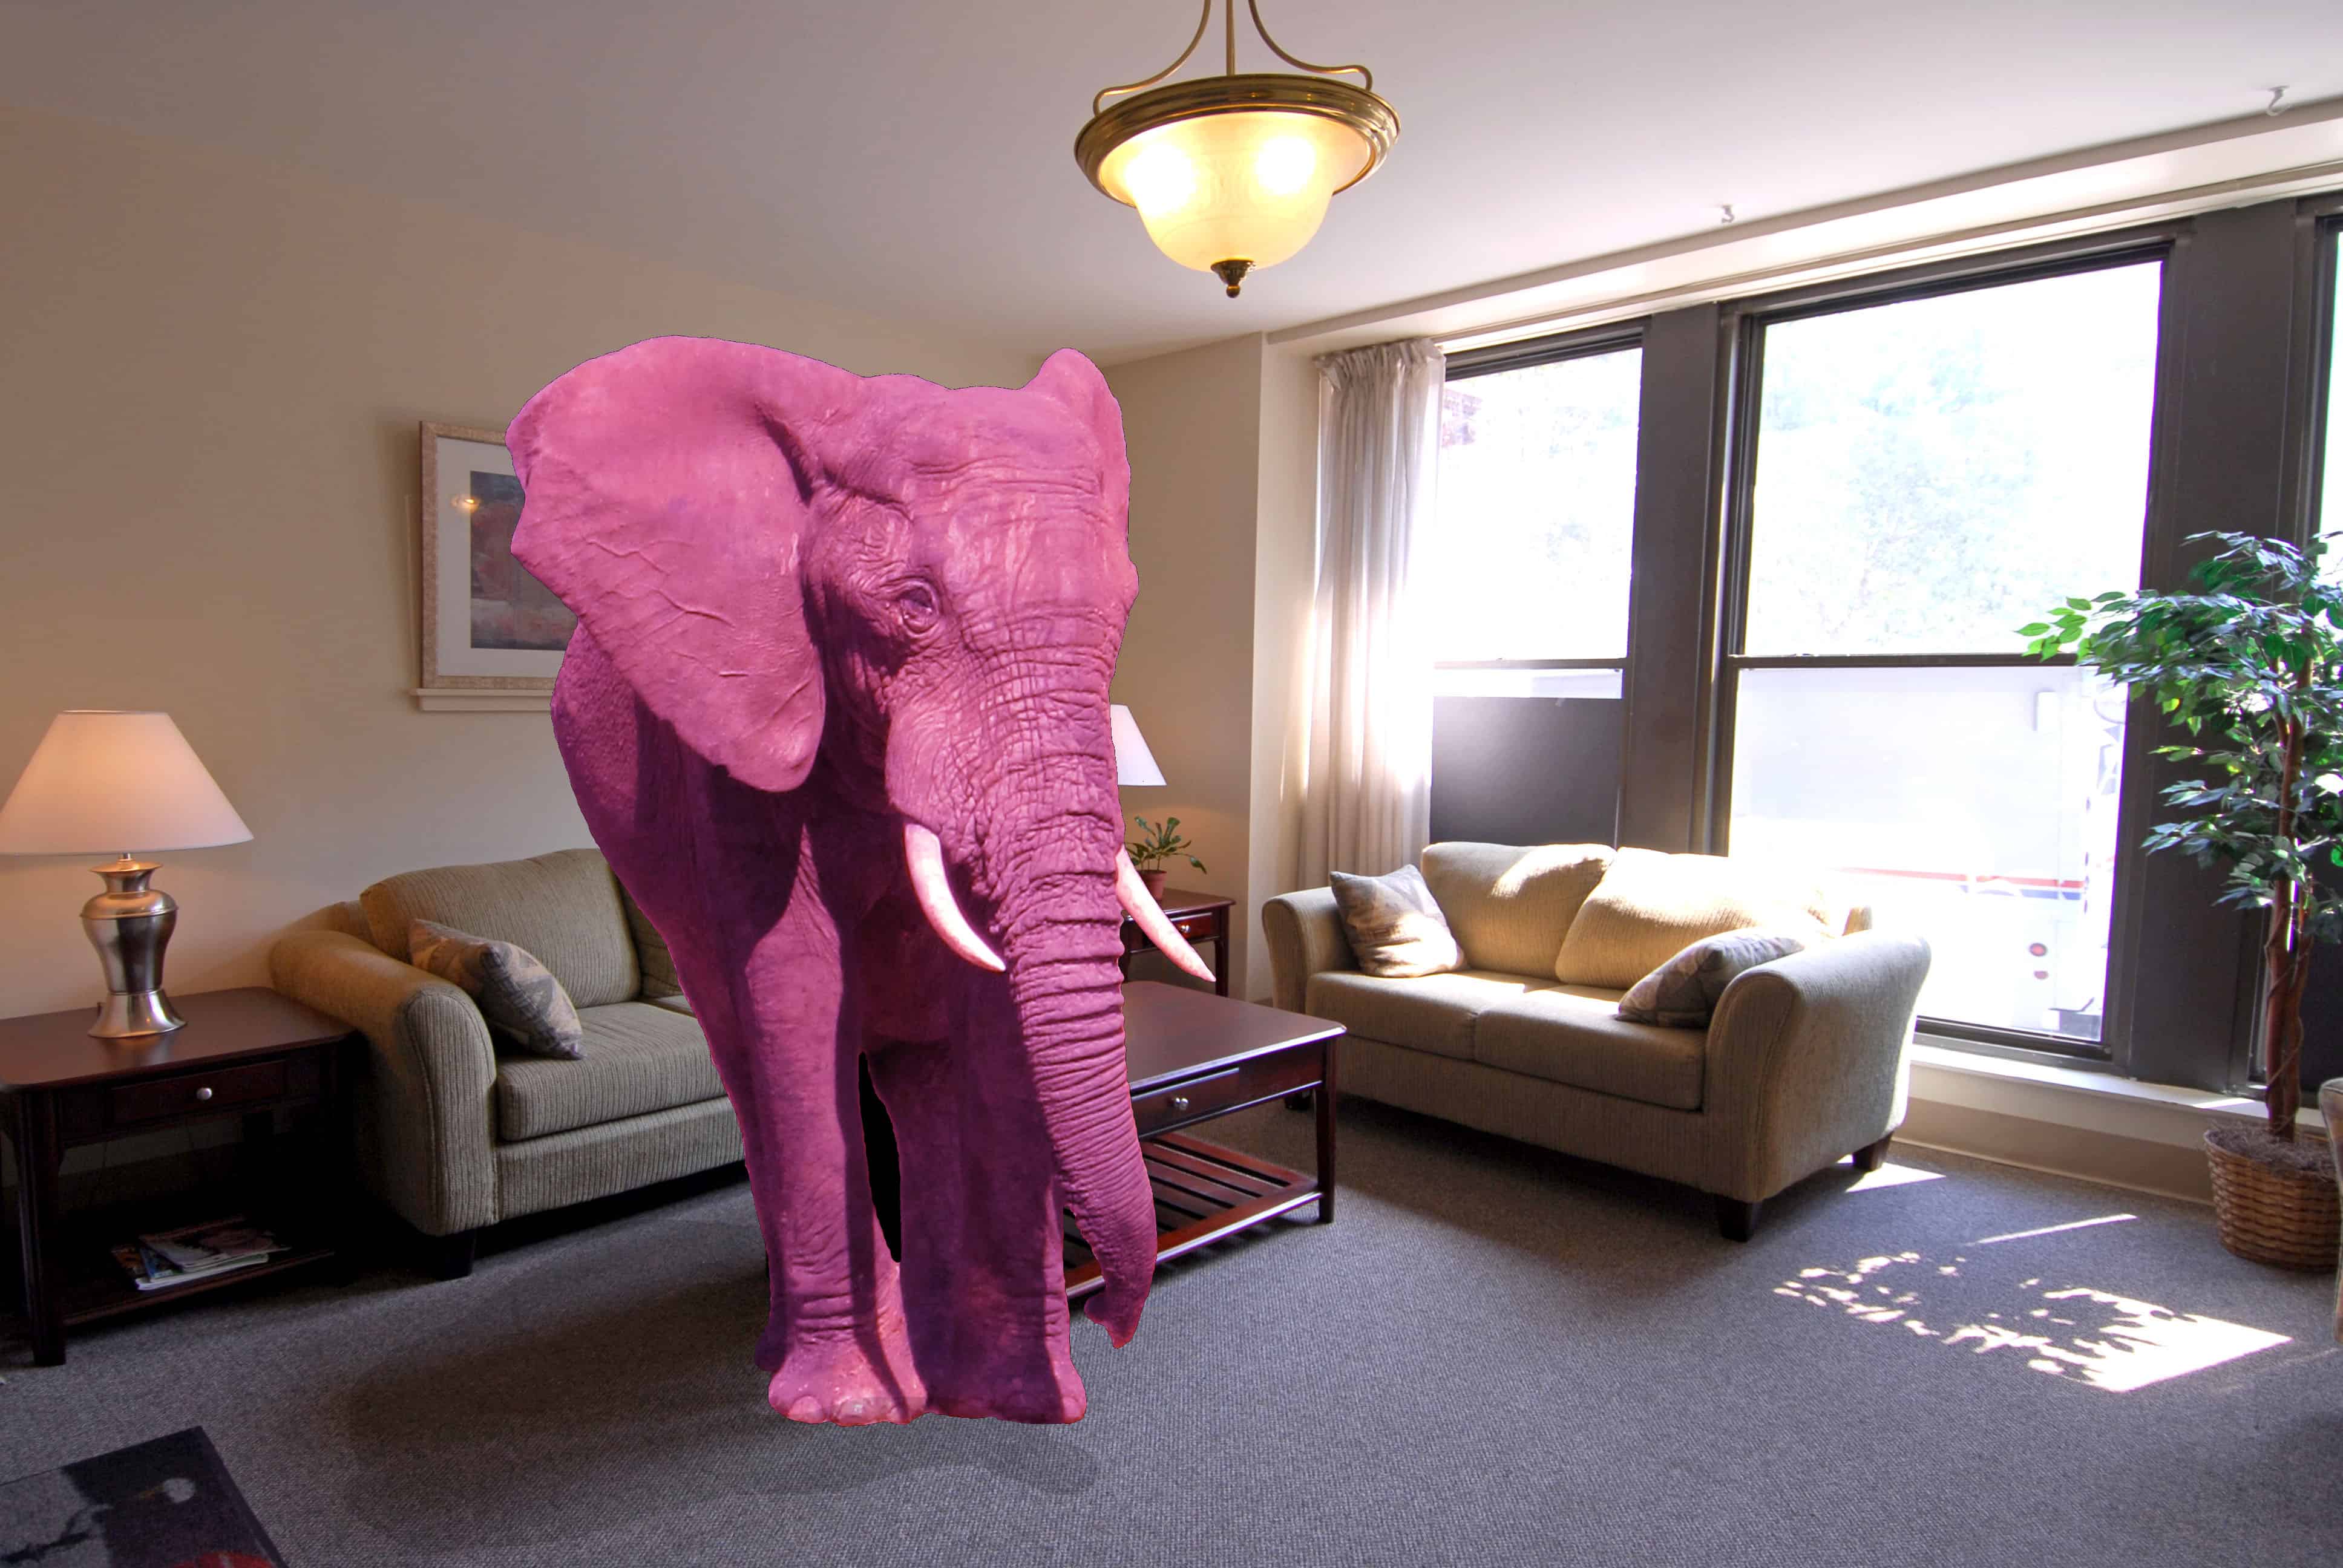 The Elephant In The Living Room Poster